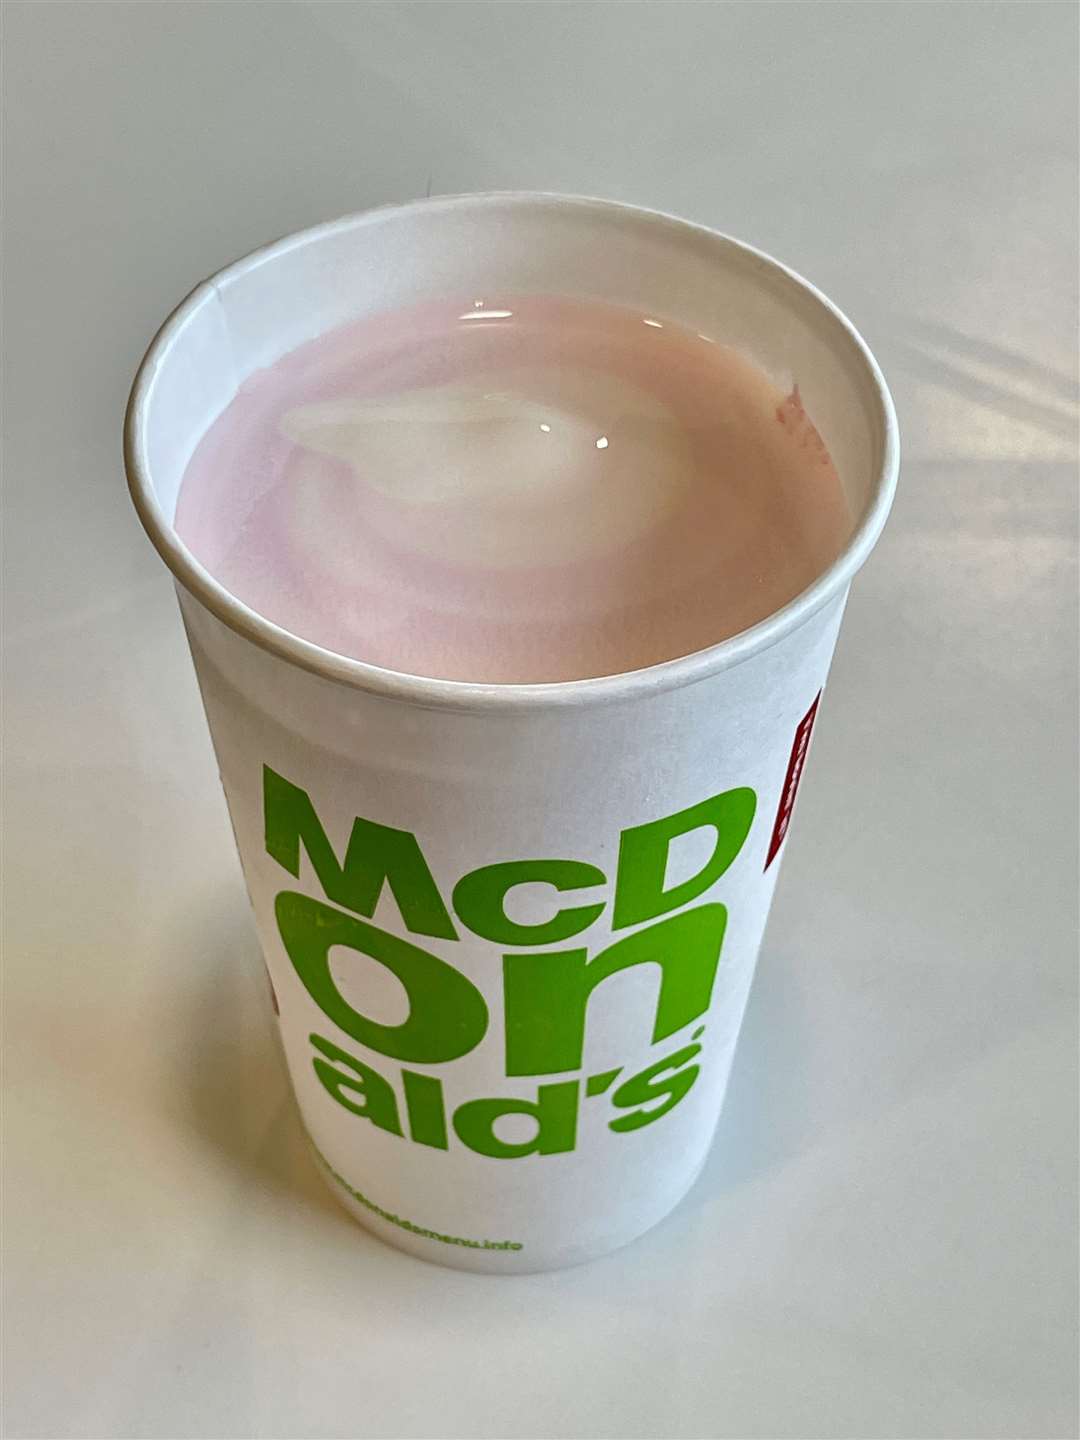 McDonald’s ran out of milkshakes in most of its UK restaurants due to ongoing supply chain problems (Liam McBurney/PA)